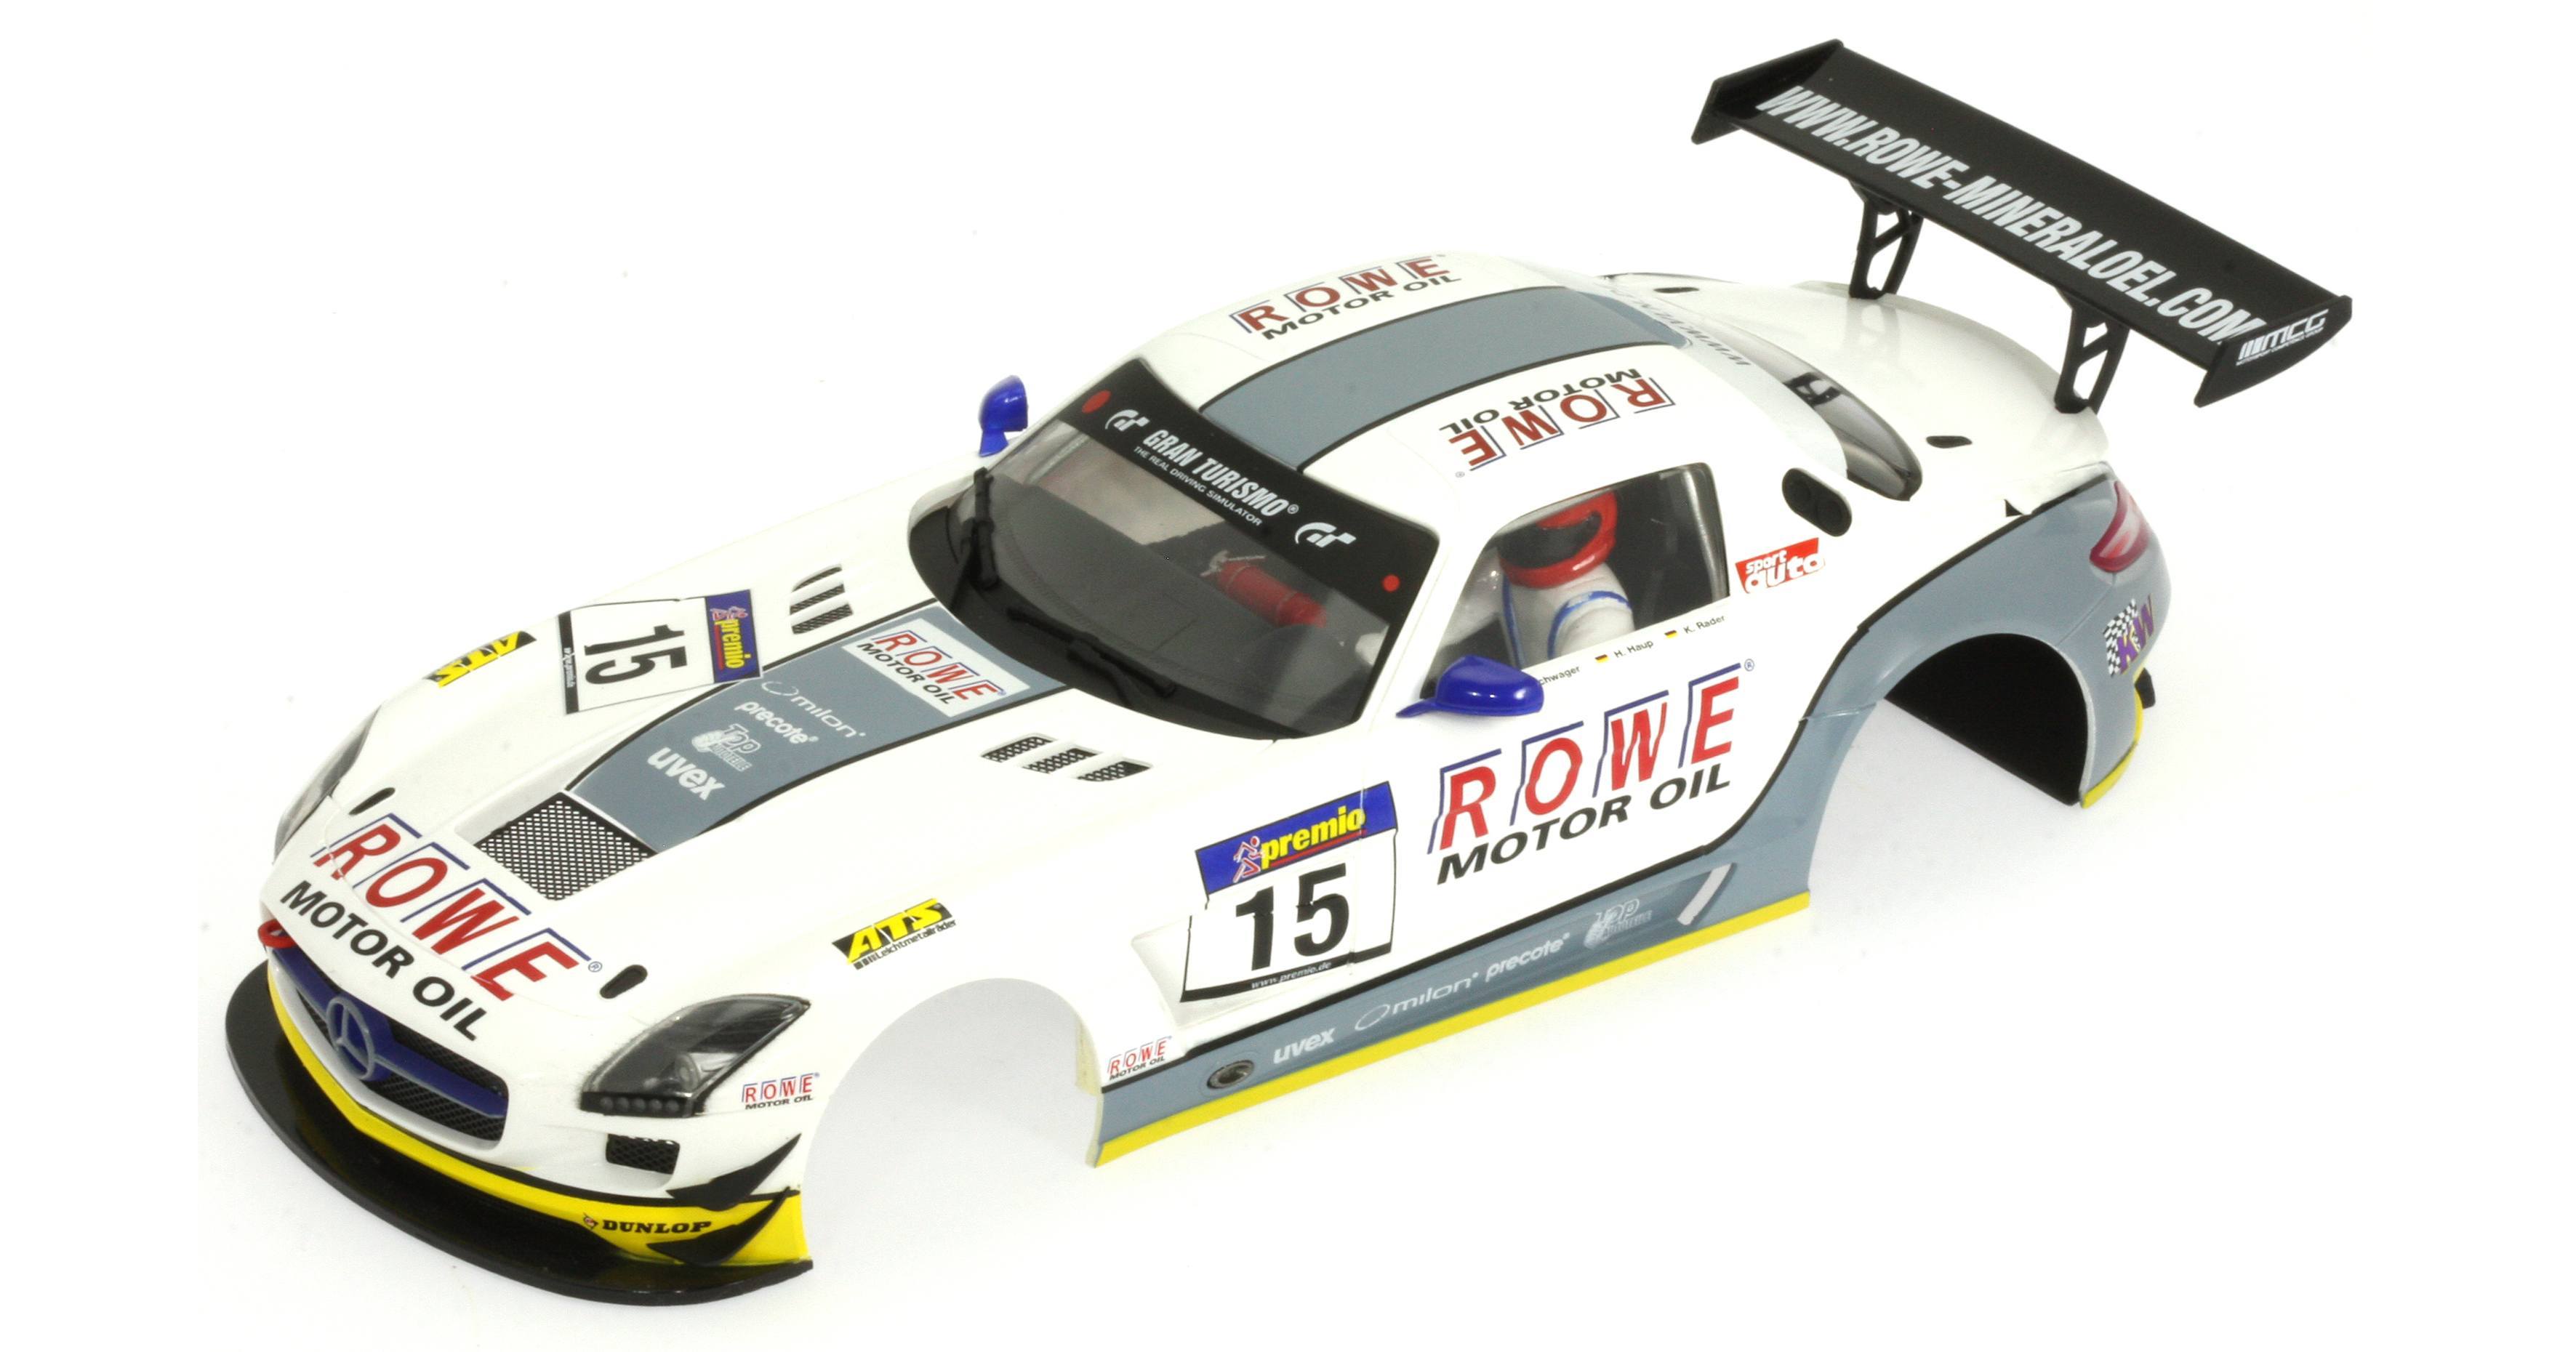 Cric Crac • Scalextric and Slot Racing Shop • Cric Crac • Scalextric and  Slot Racing Shop - Placa fibra carbono 140x62x1,5mm.